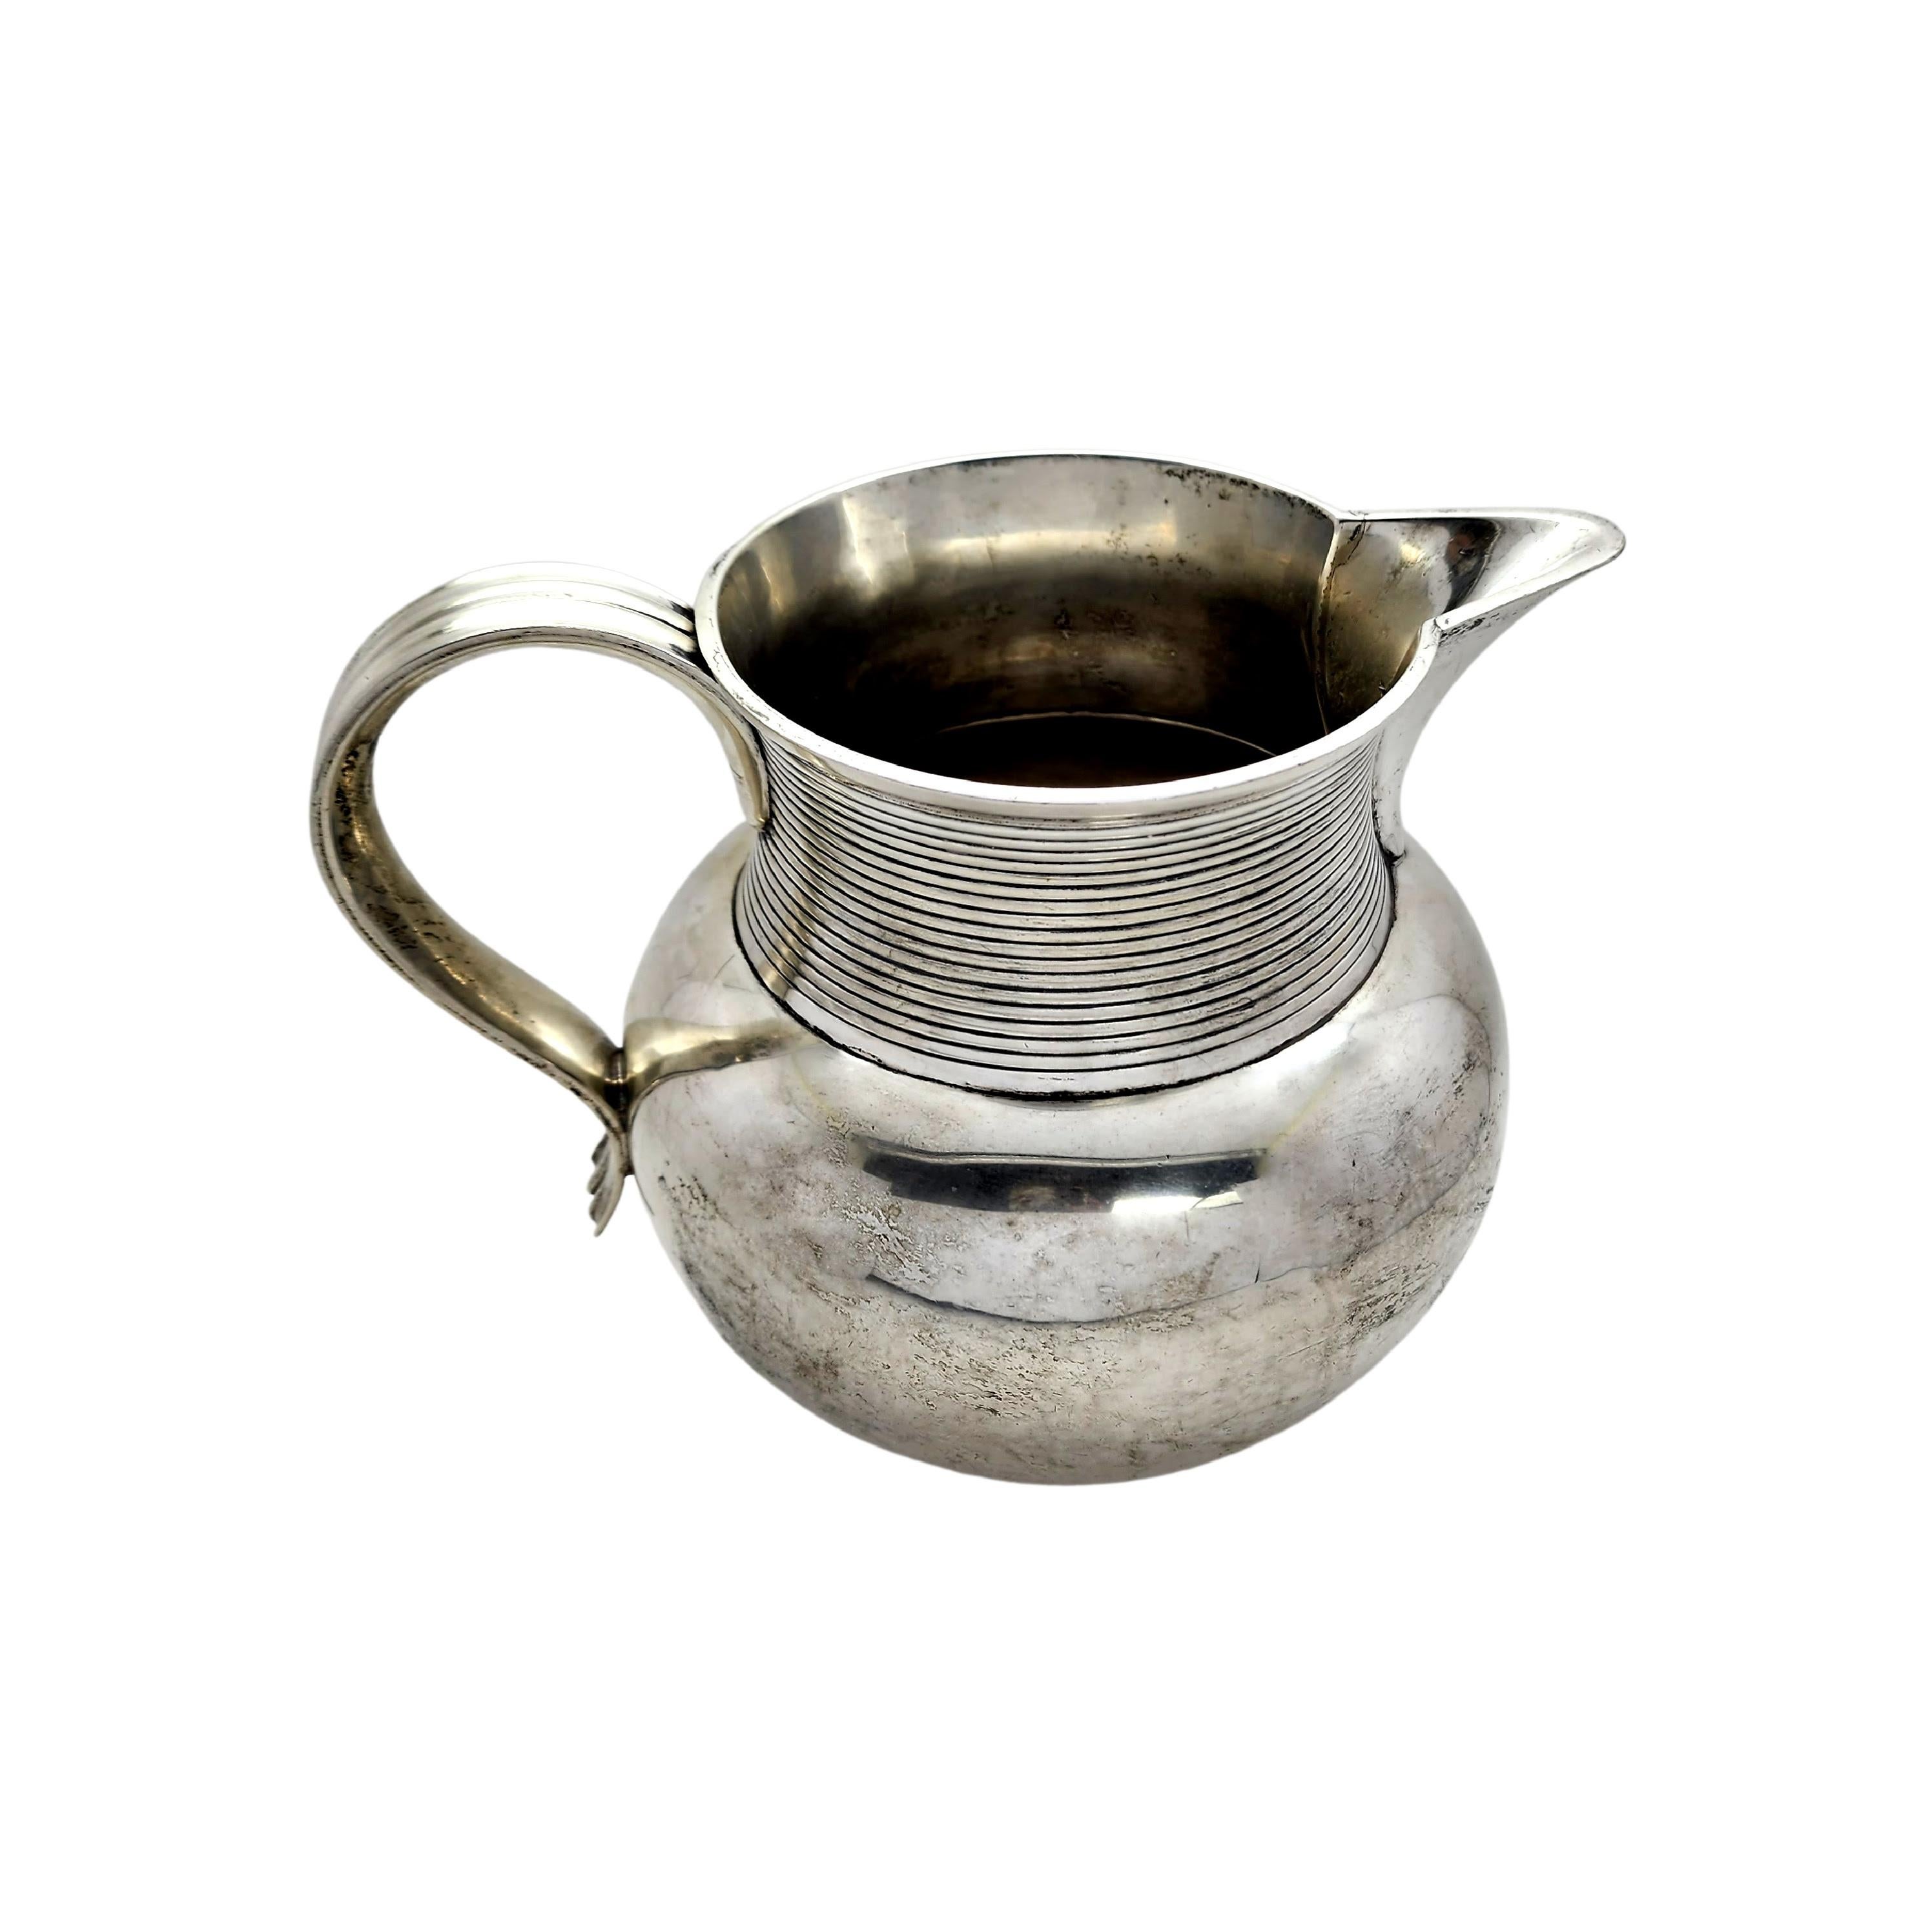 Antique Victorian era sterling silver water jug pitcher by Holland, Aldwinkle & Slater of London, England, circa 1894.

Beautiful and elegant short and wide water jug pitcher, lightly hammered with ribbed design at top.

Measures approx 7